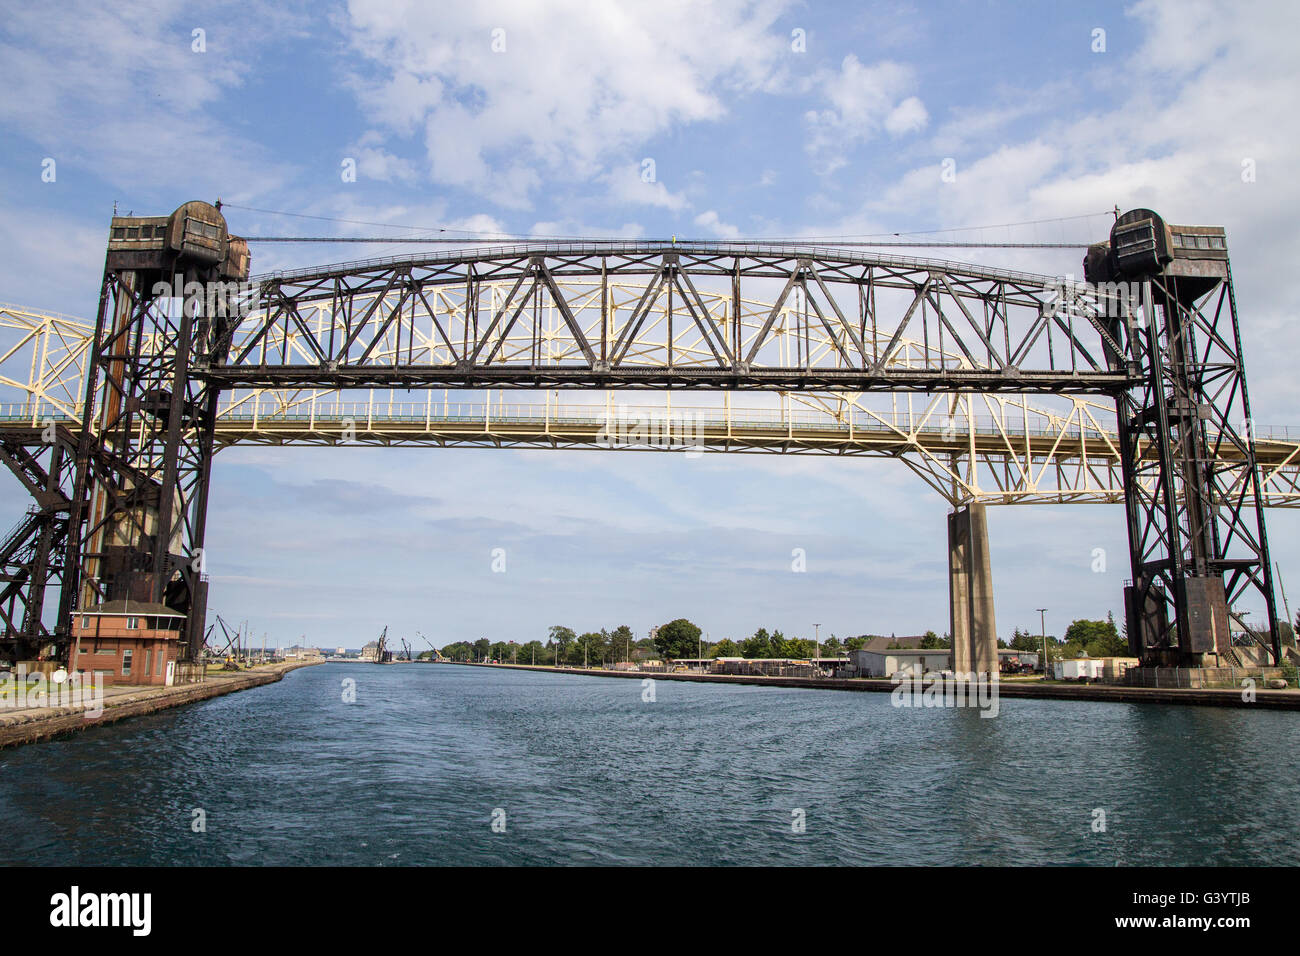 The Sault Ste. Marie International Bridge spans the St. Mary's River between Sault Ste. Marie, Michigan and Ontario Canada. Stock Photo